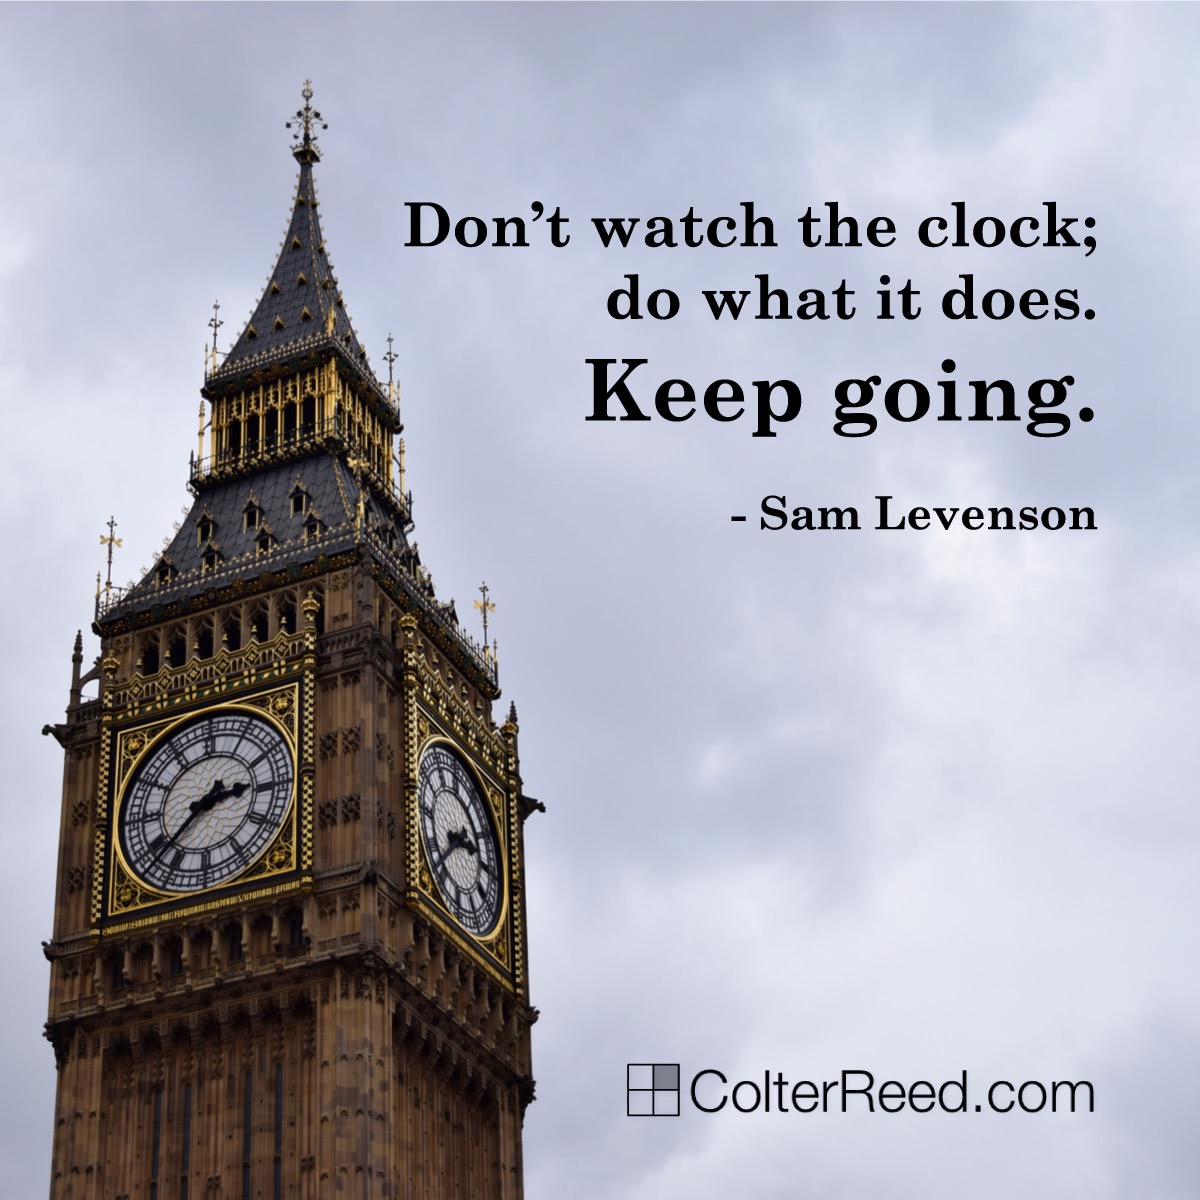 “Don’t watch the clock; do what it does. Keep going.” —Sam Levenson